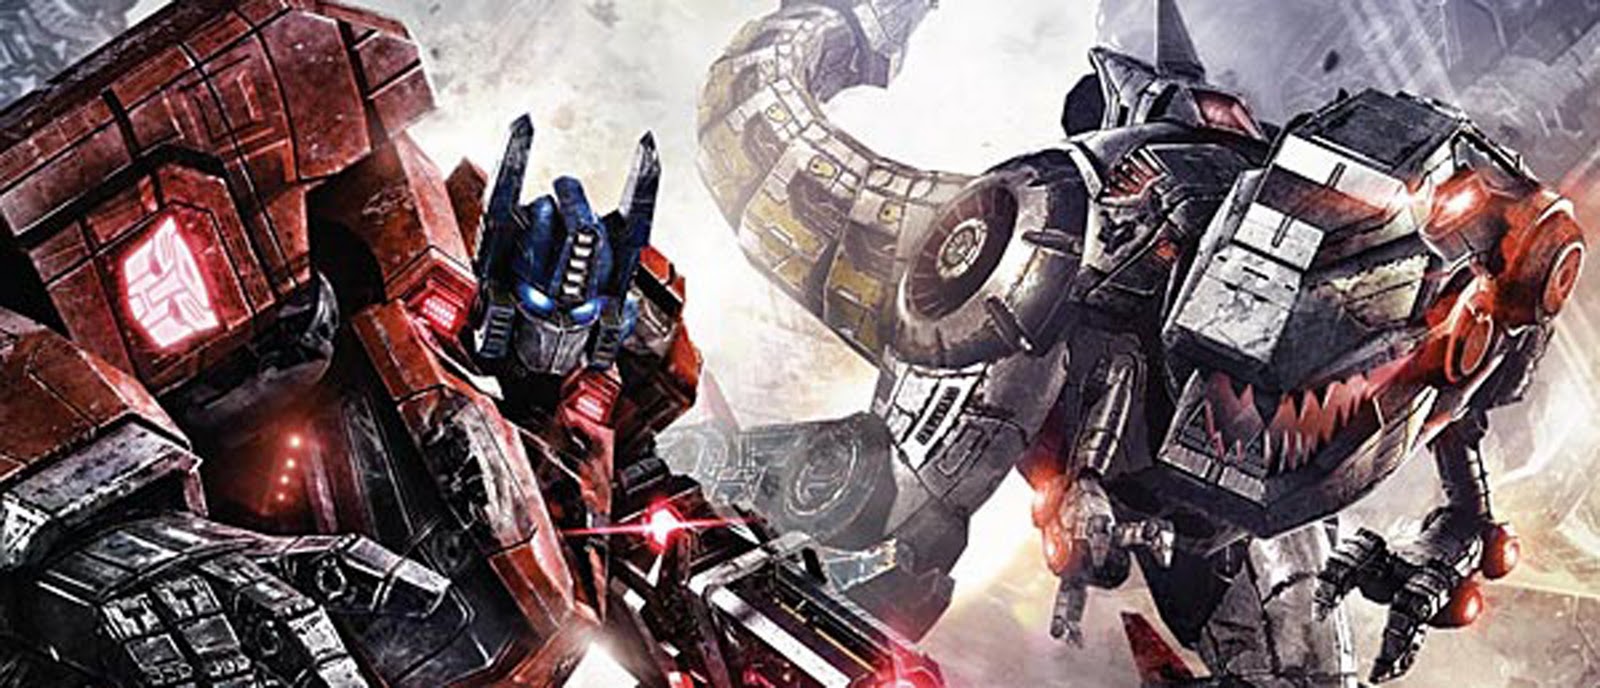 Dsng S Sci Fi Megaverse Transformers Fall Of Cybertron Official